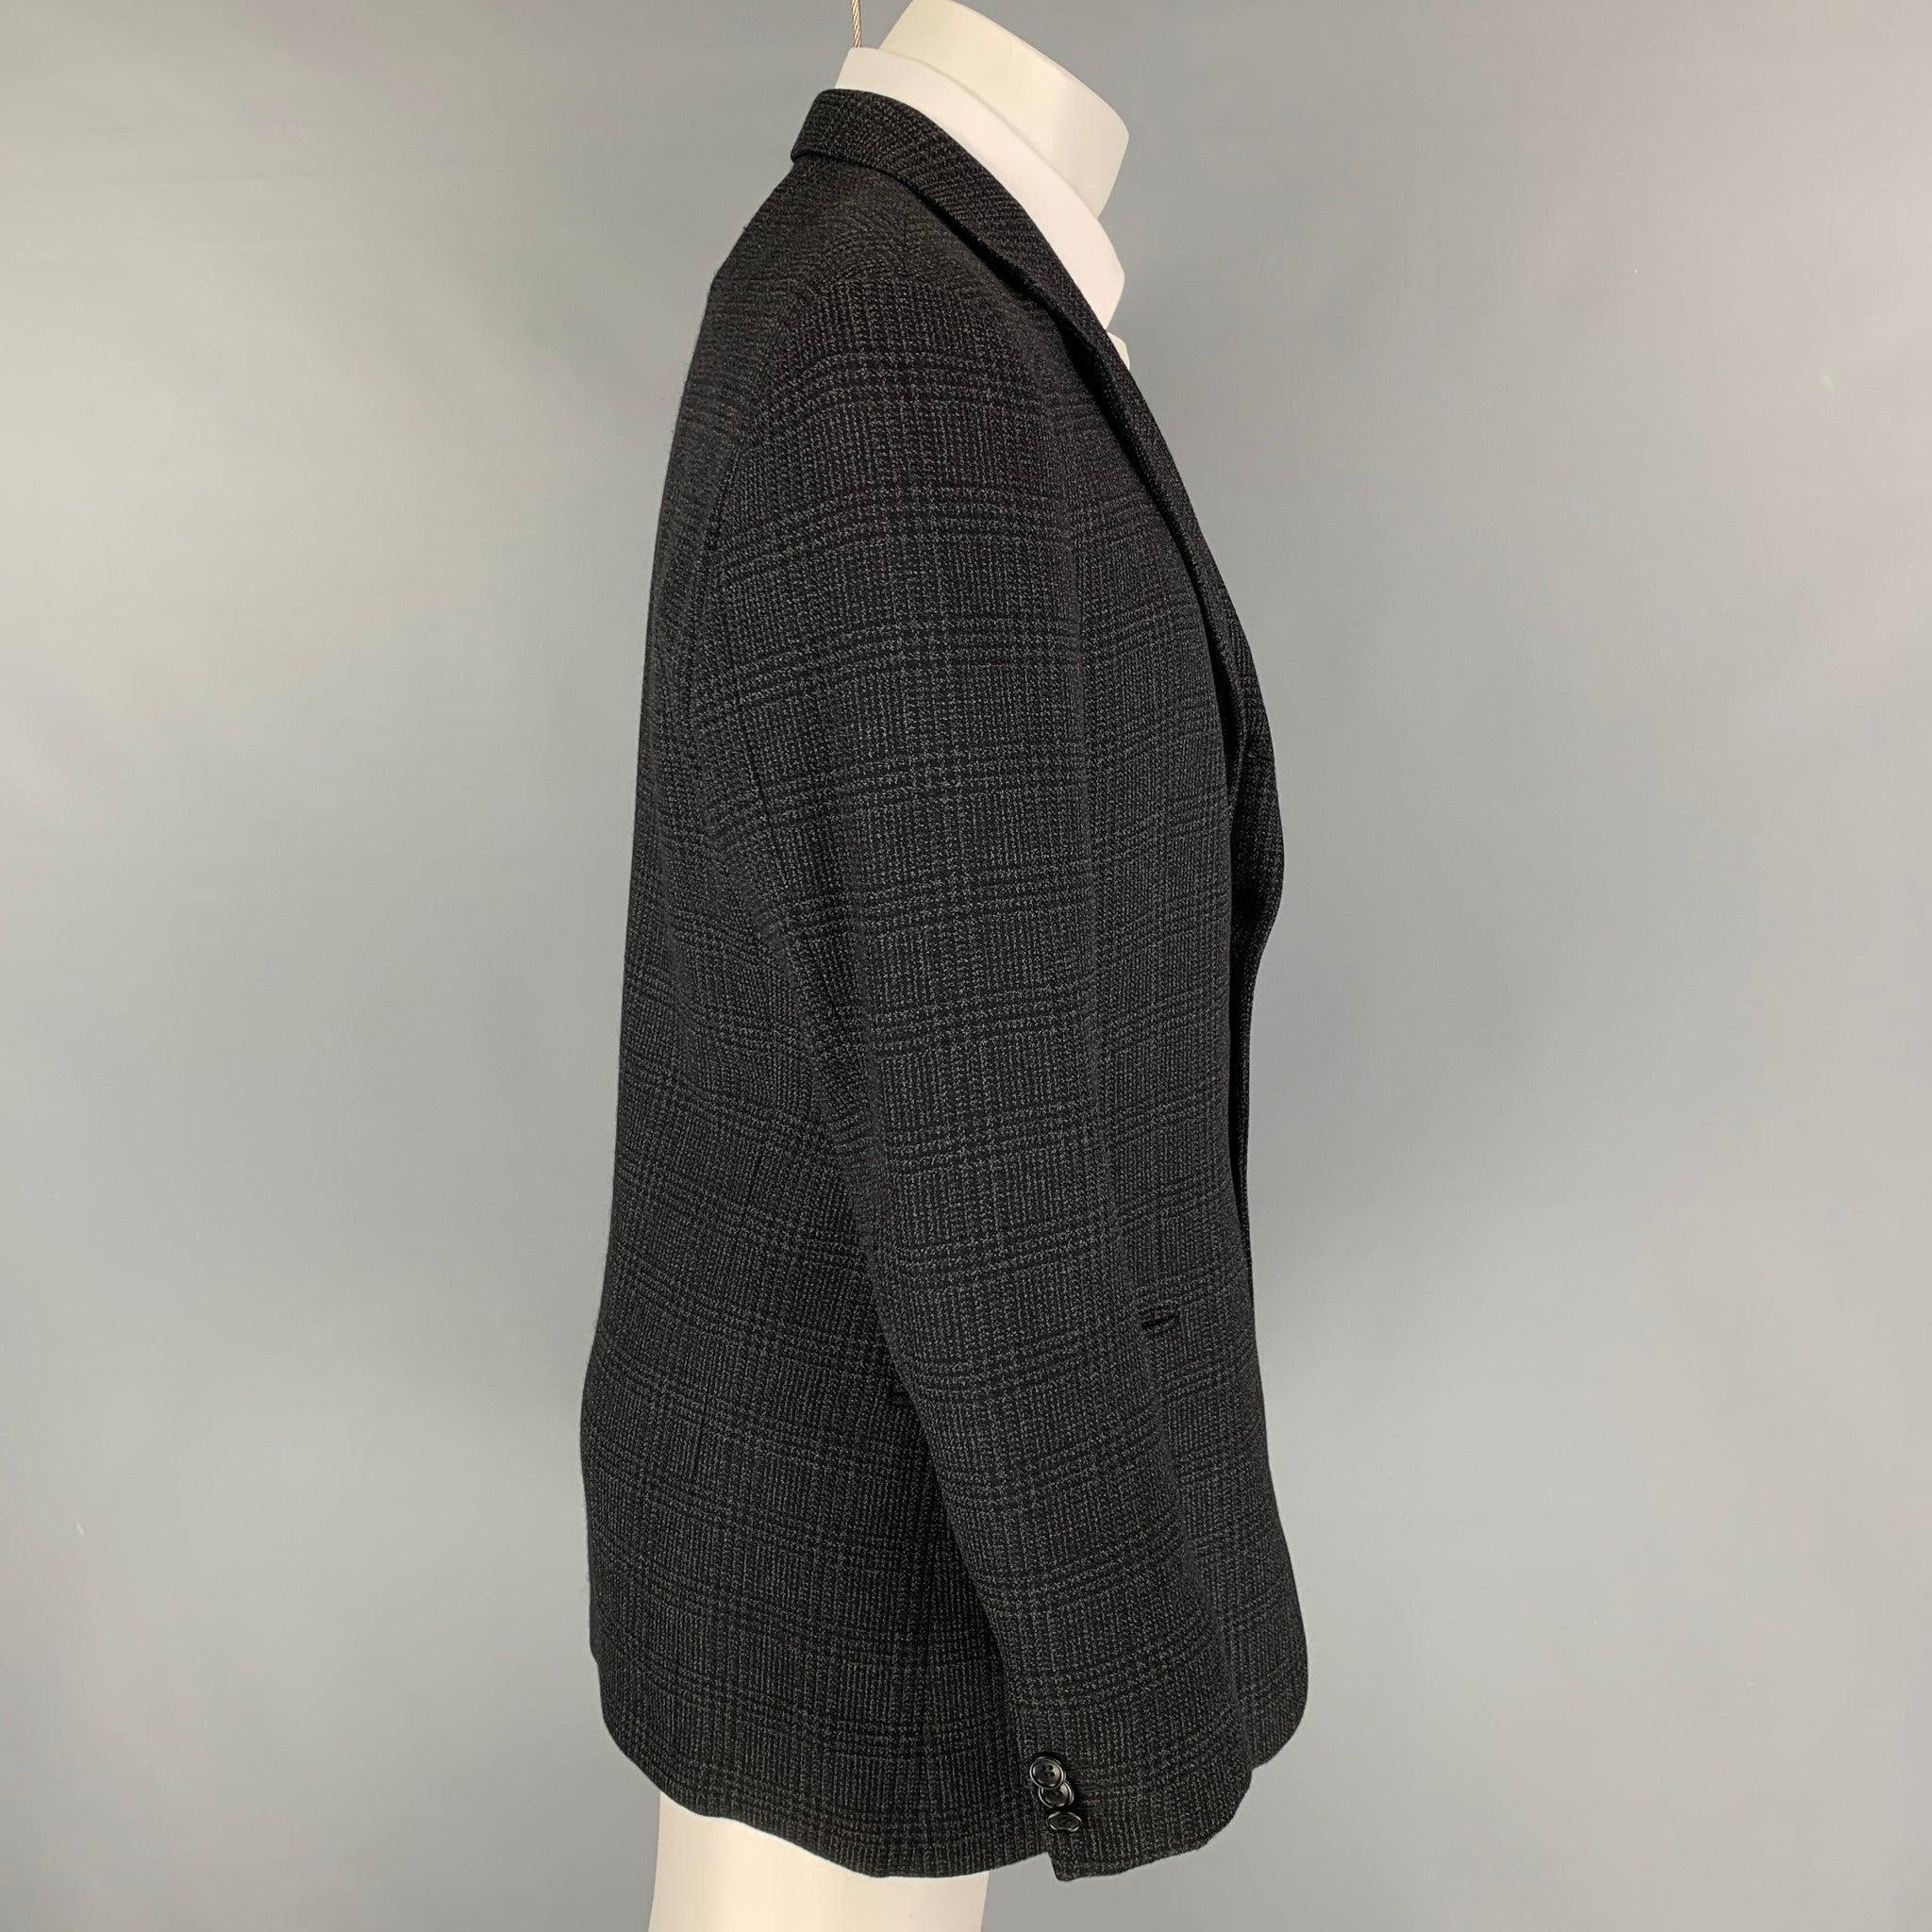 ARMANI COLLEZIONI sport coat comes in a charcoal & black plaid wool with a full liner featuring a notch lapel, slit pockets, and a double button closure.
Very Good
Pre-Owned Condition.  

Marked:   40 

Measurements: 
 
Shoulder: 19 inches  Chest: